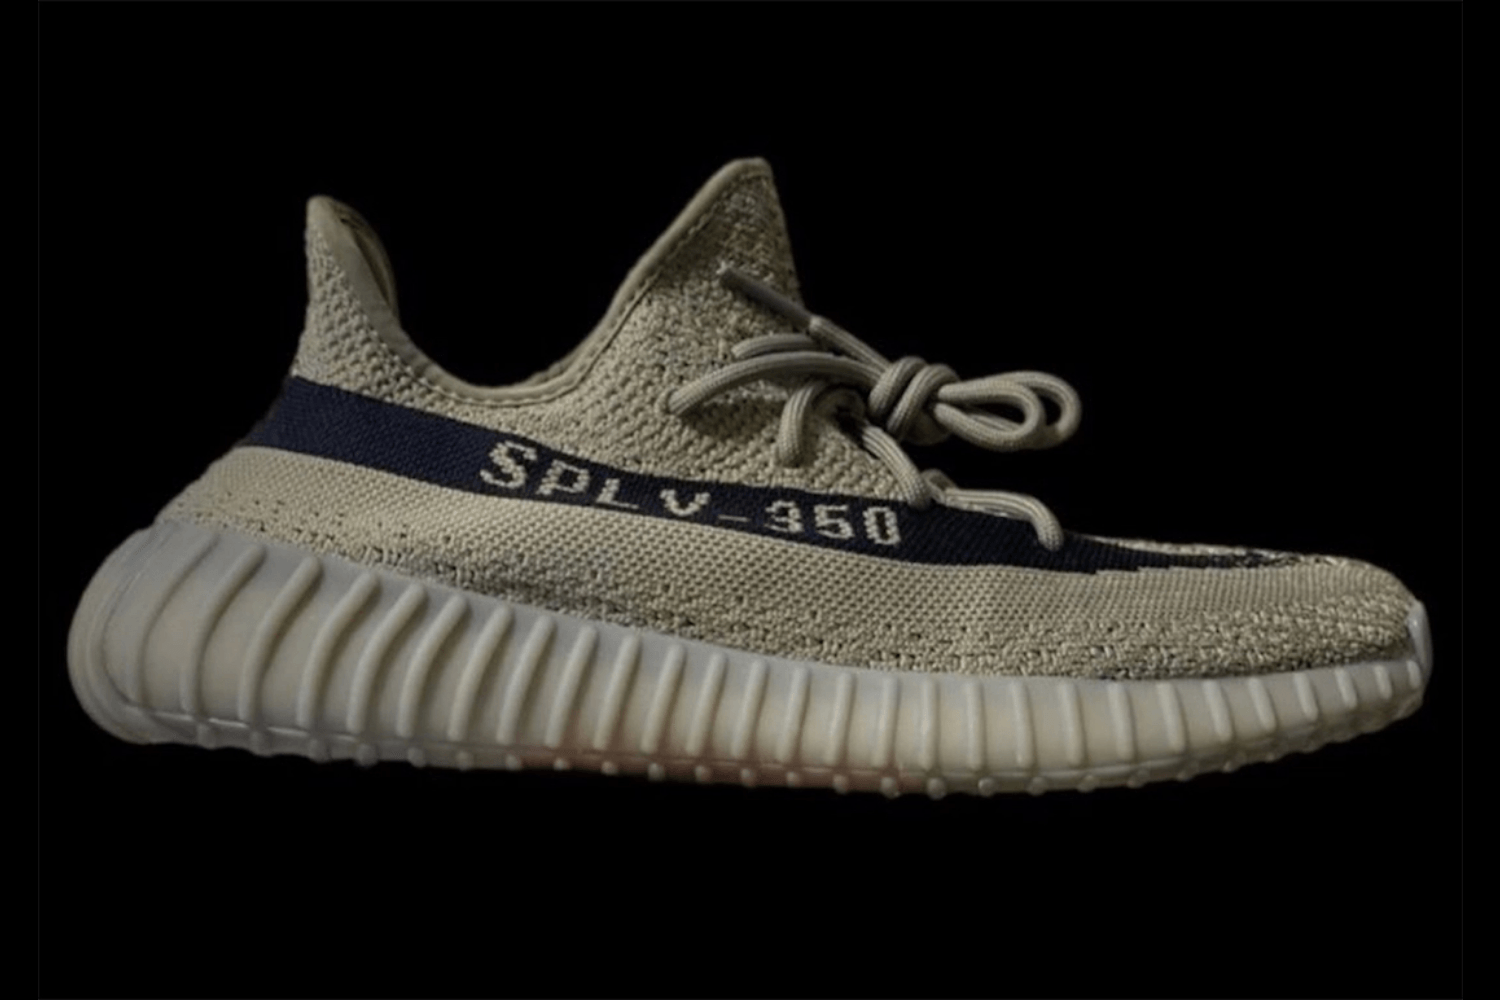 The adidas Yeezy Boost 350 V2 'Granite' will be released